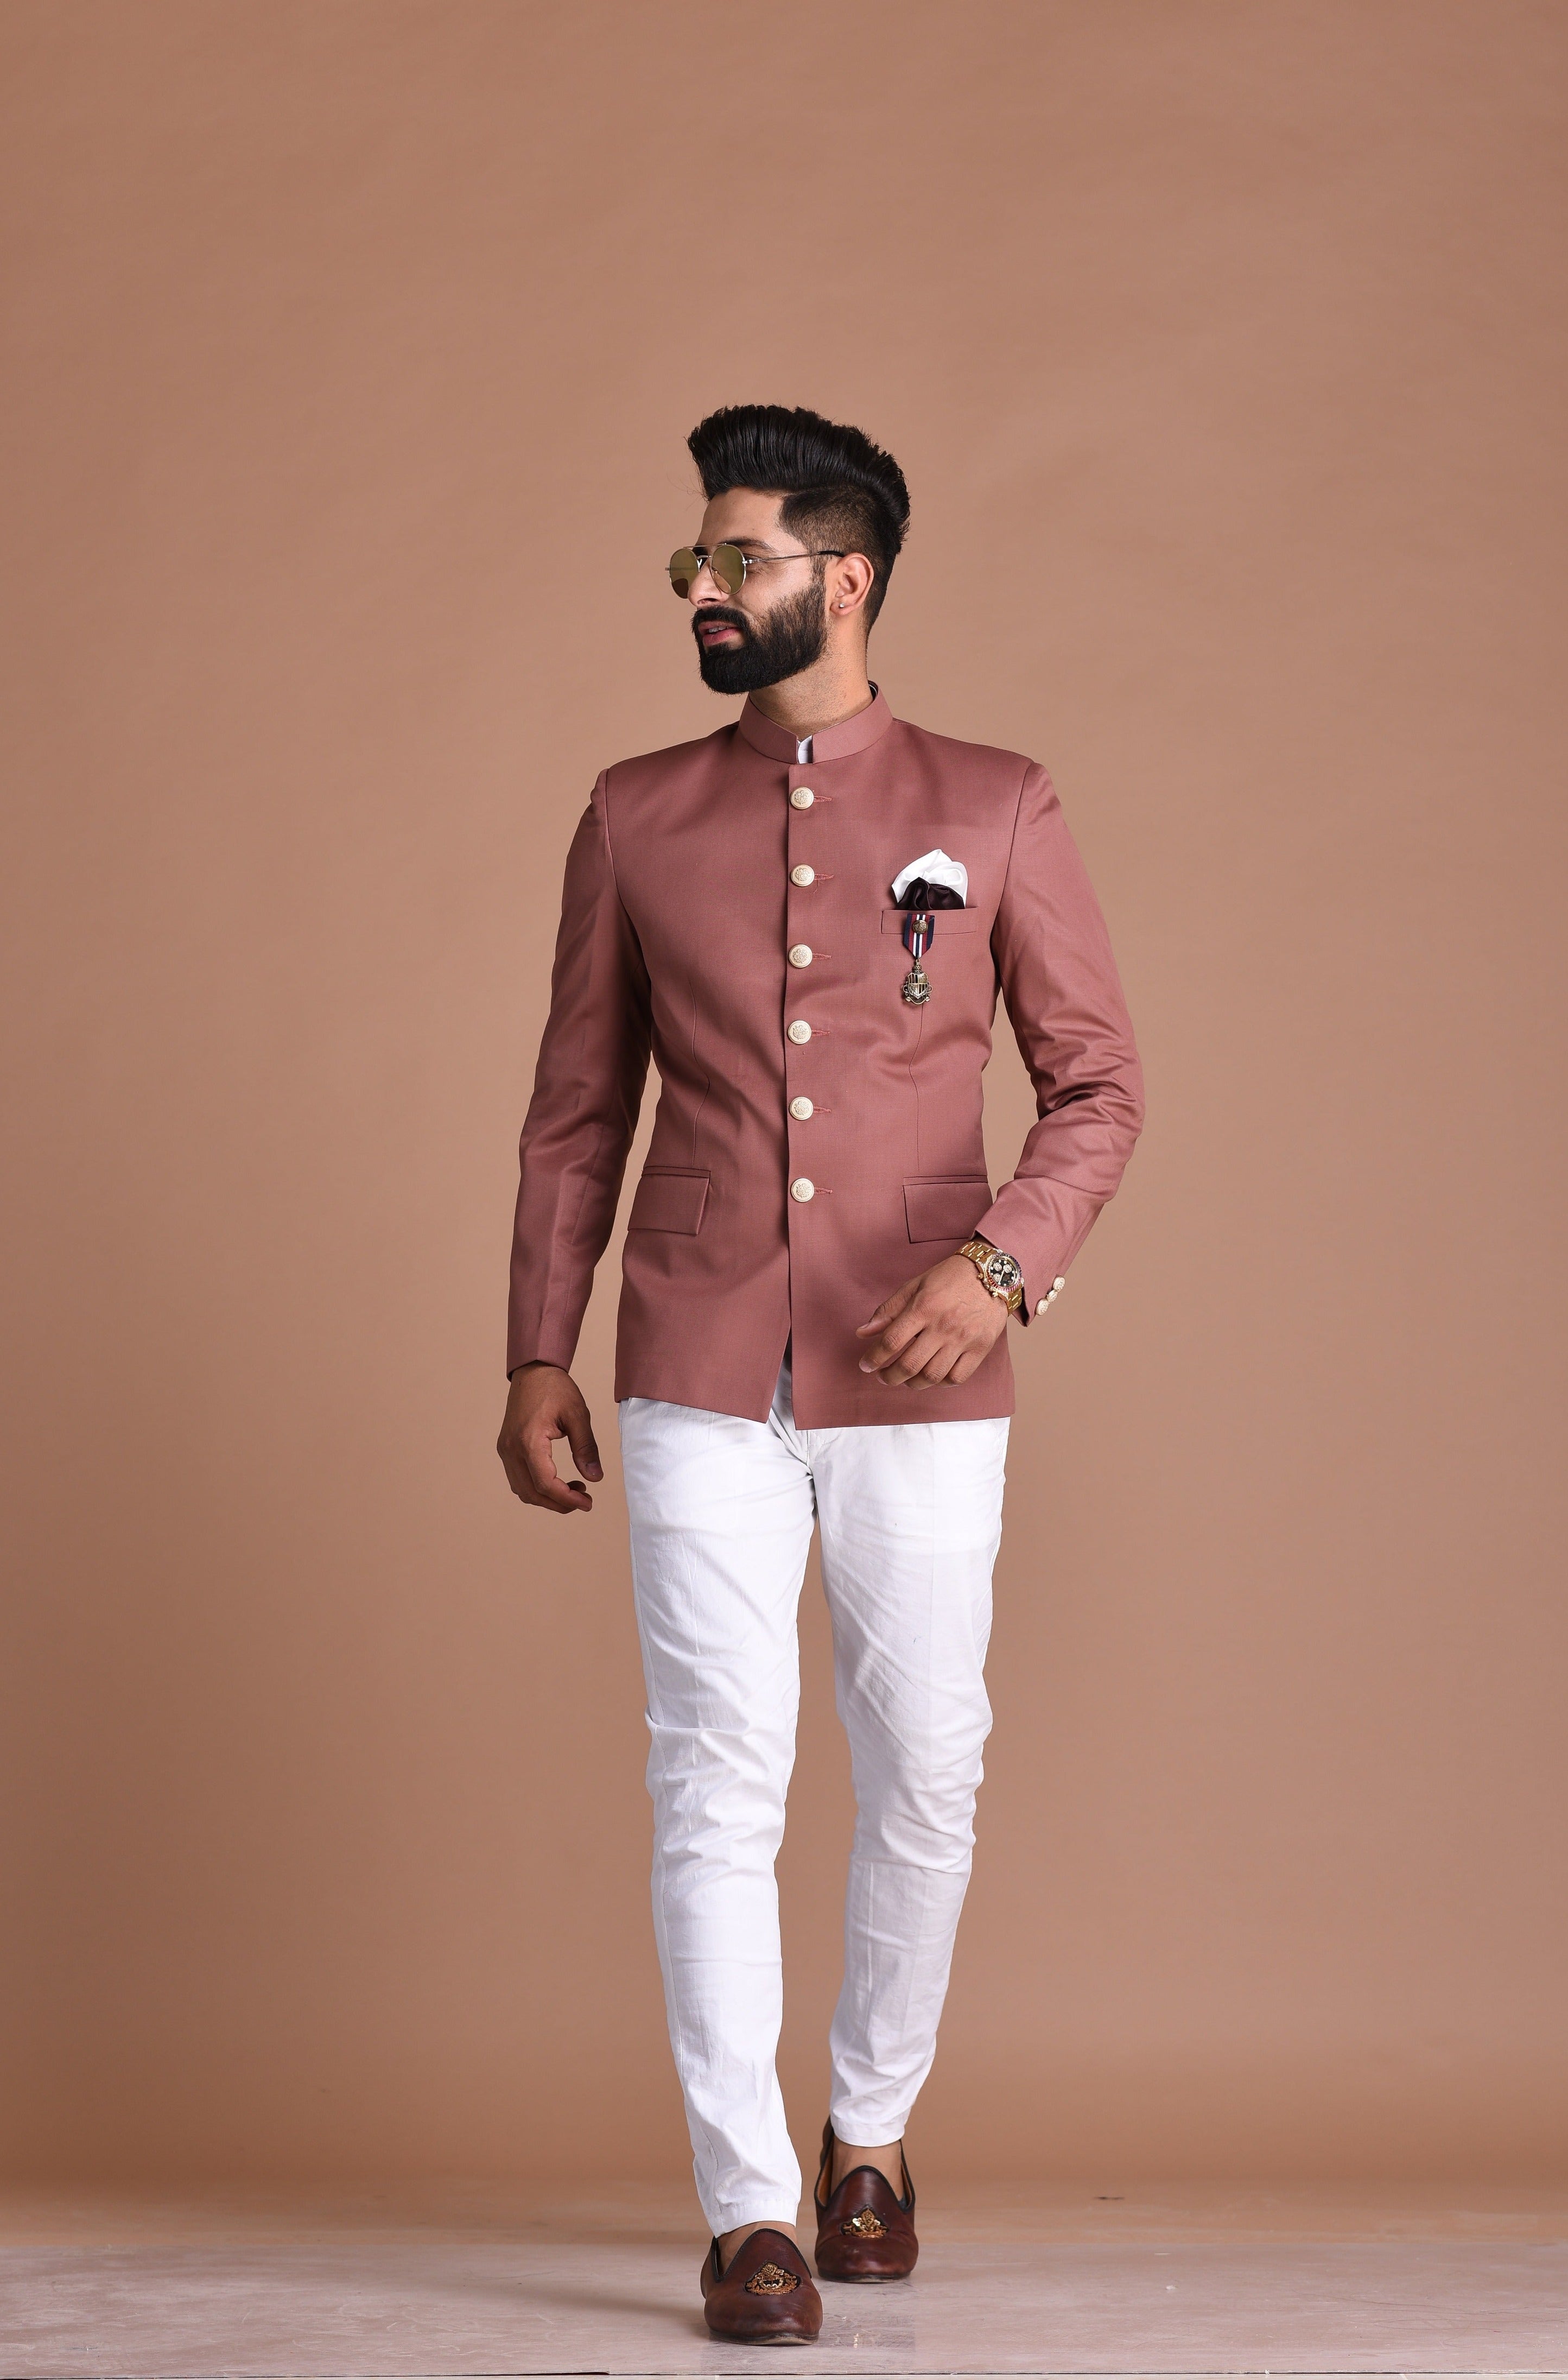 Stunning Rosewood Designer Jodhpuri Bandhgala  with White Trouser| Partywear for Grooms and Friends | Wedding Family Functions |open lawn party